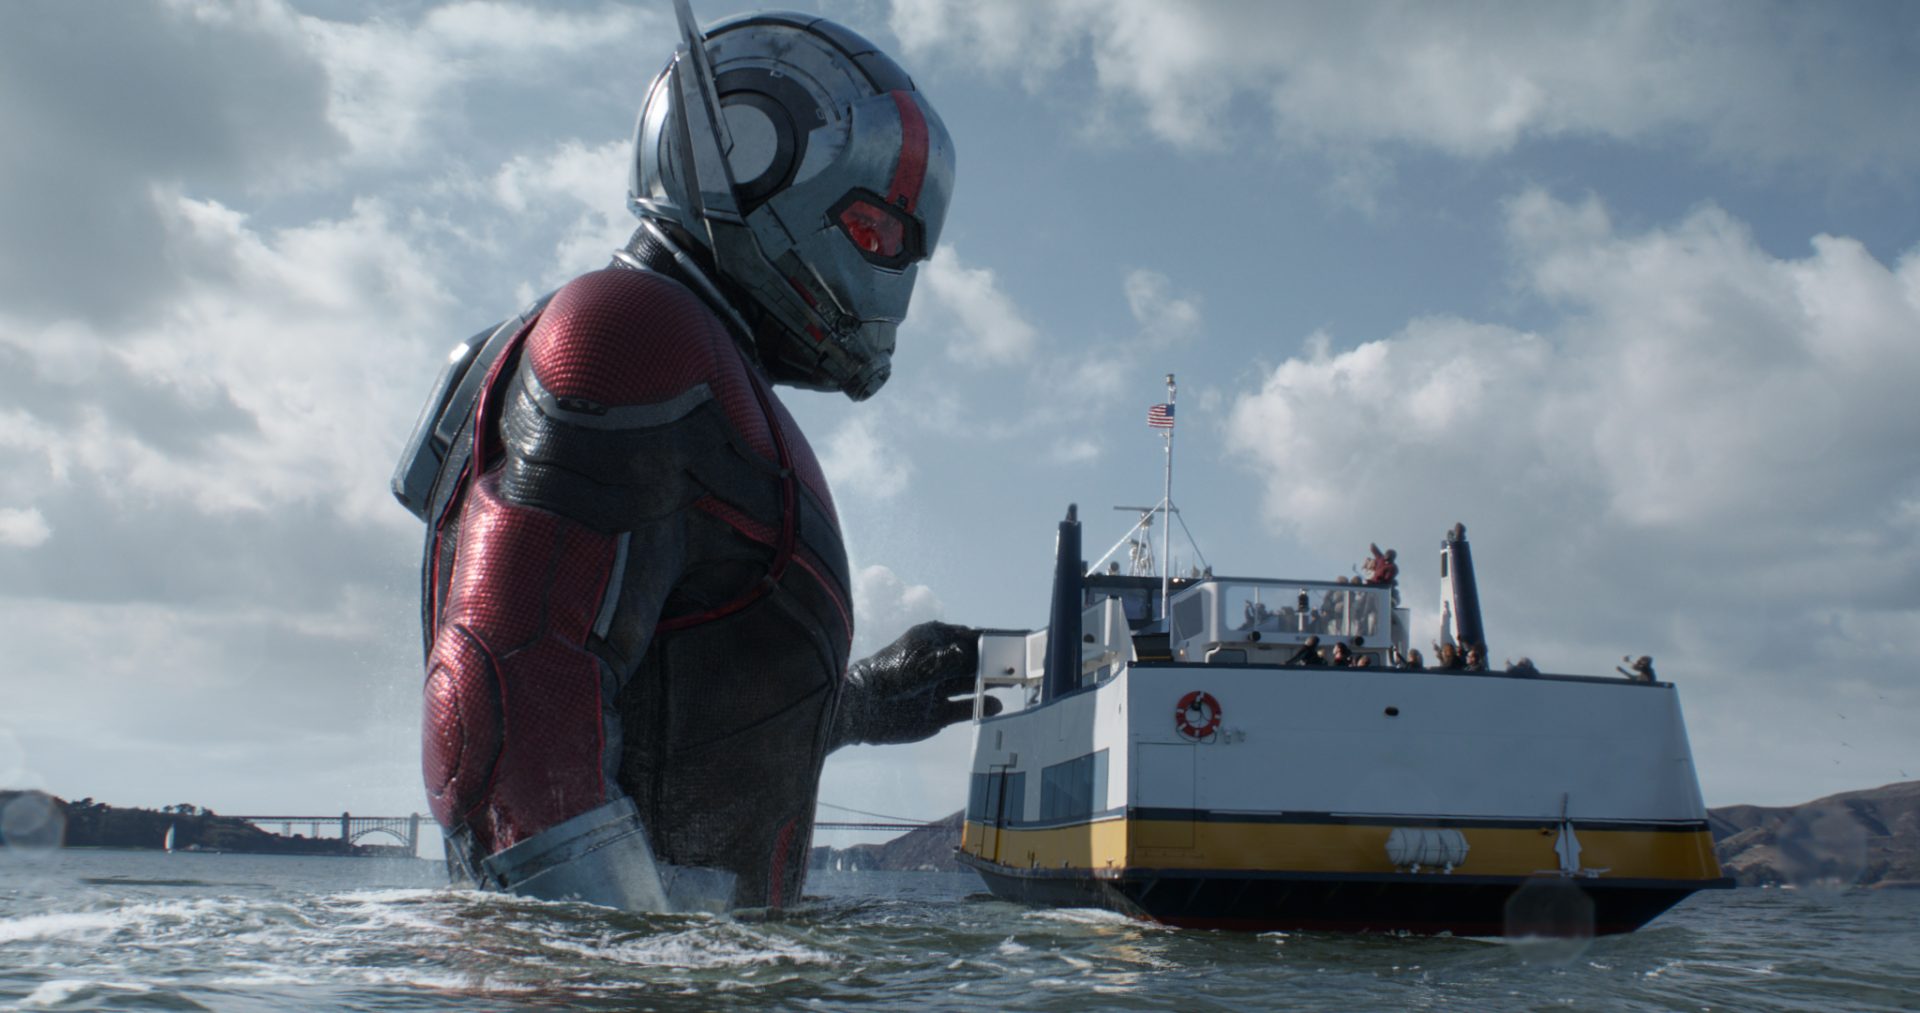 Ant-Man 2 – Ant-Man and the Wasp